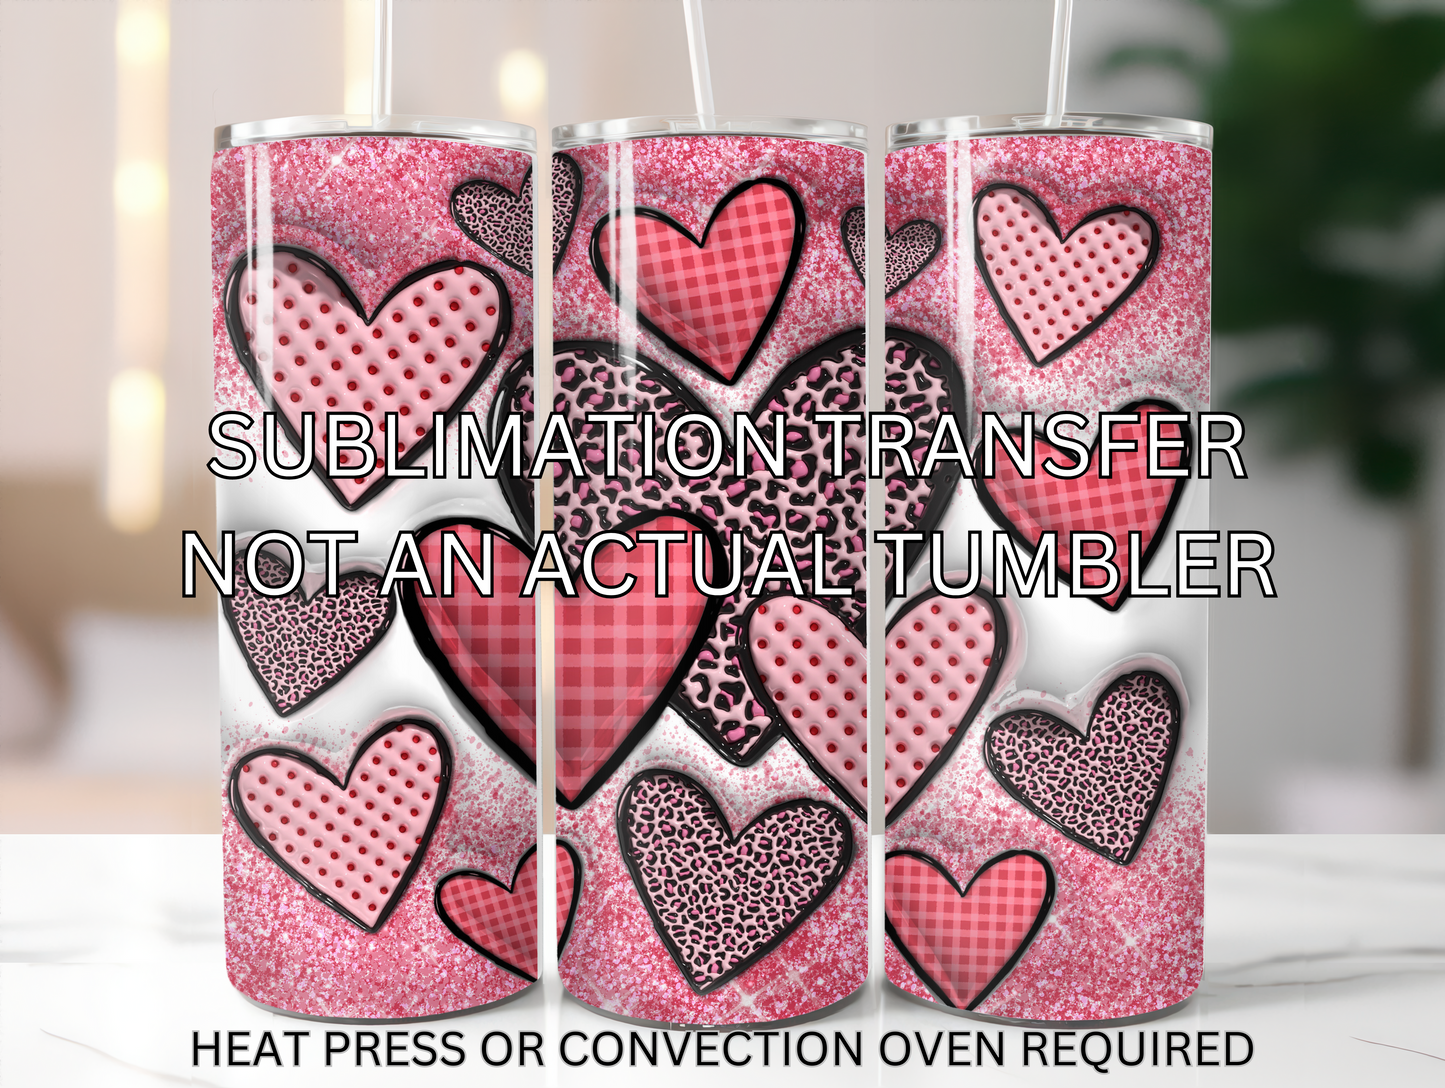 Puffy Hearts sublimation transfer